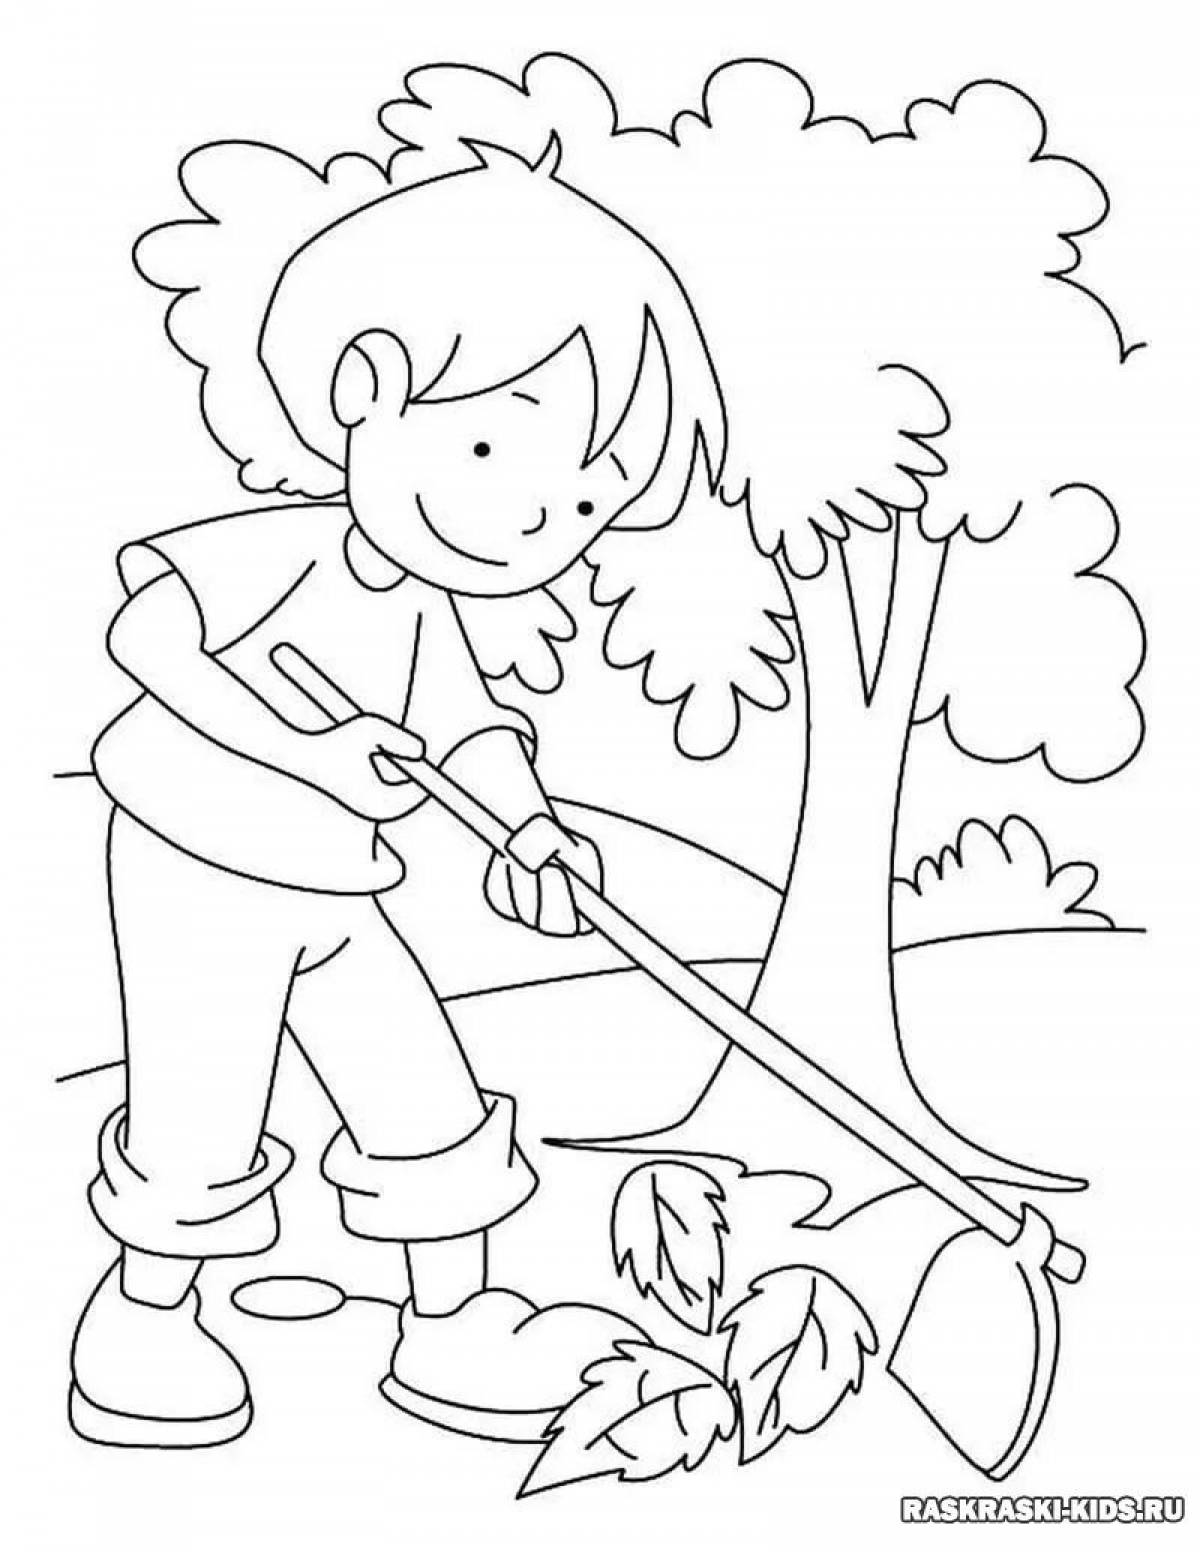 Fun coloring book on the theme of nature 